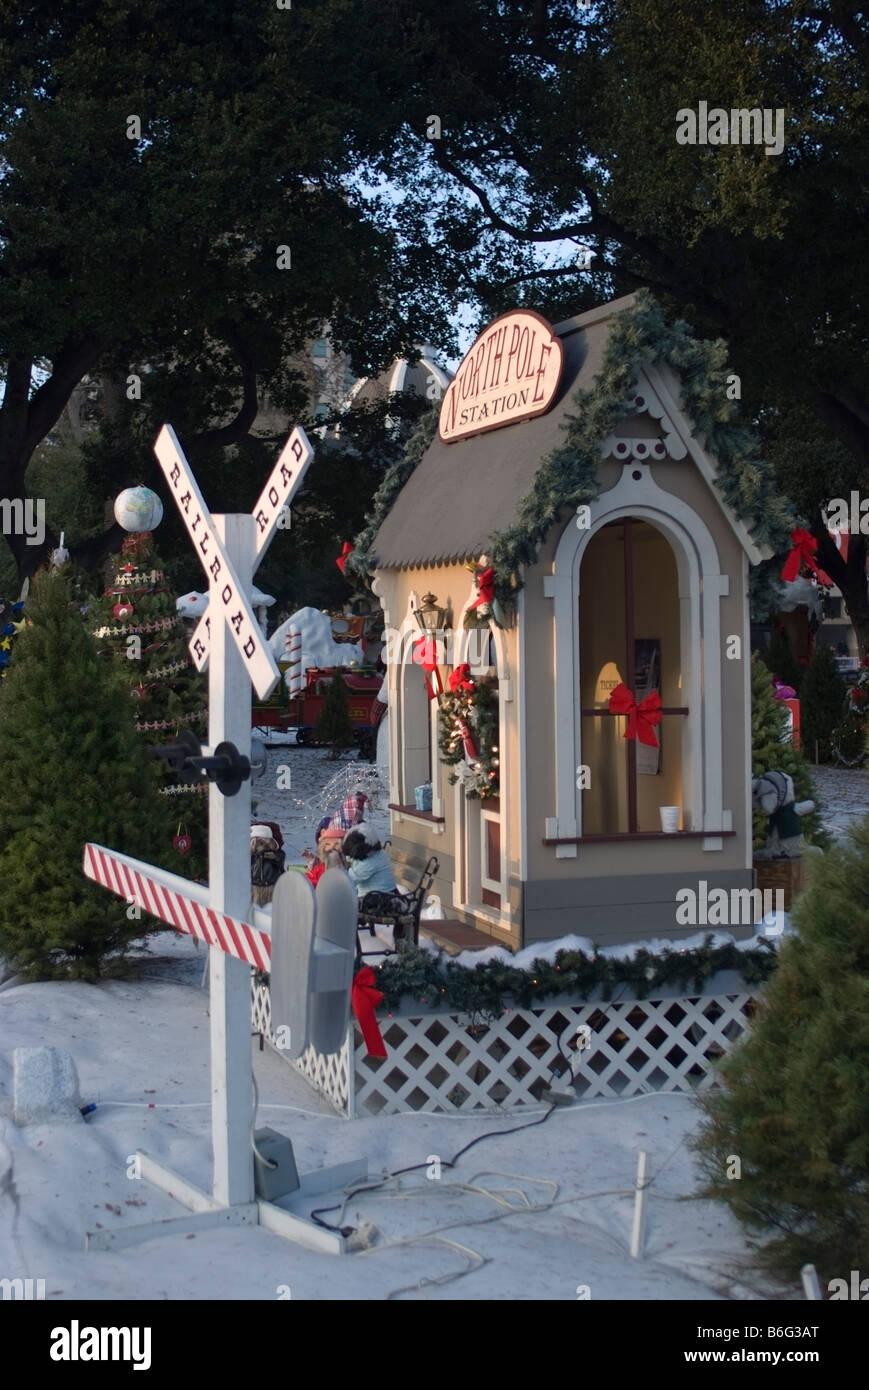 North Pole Station, a miniature station house along the Santa Claus Railroad at Christmas in the Park in central San Jose,CA. Stock Photo